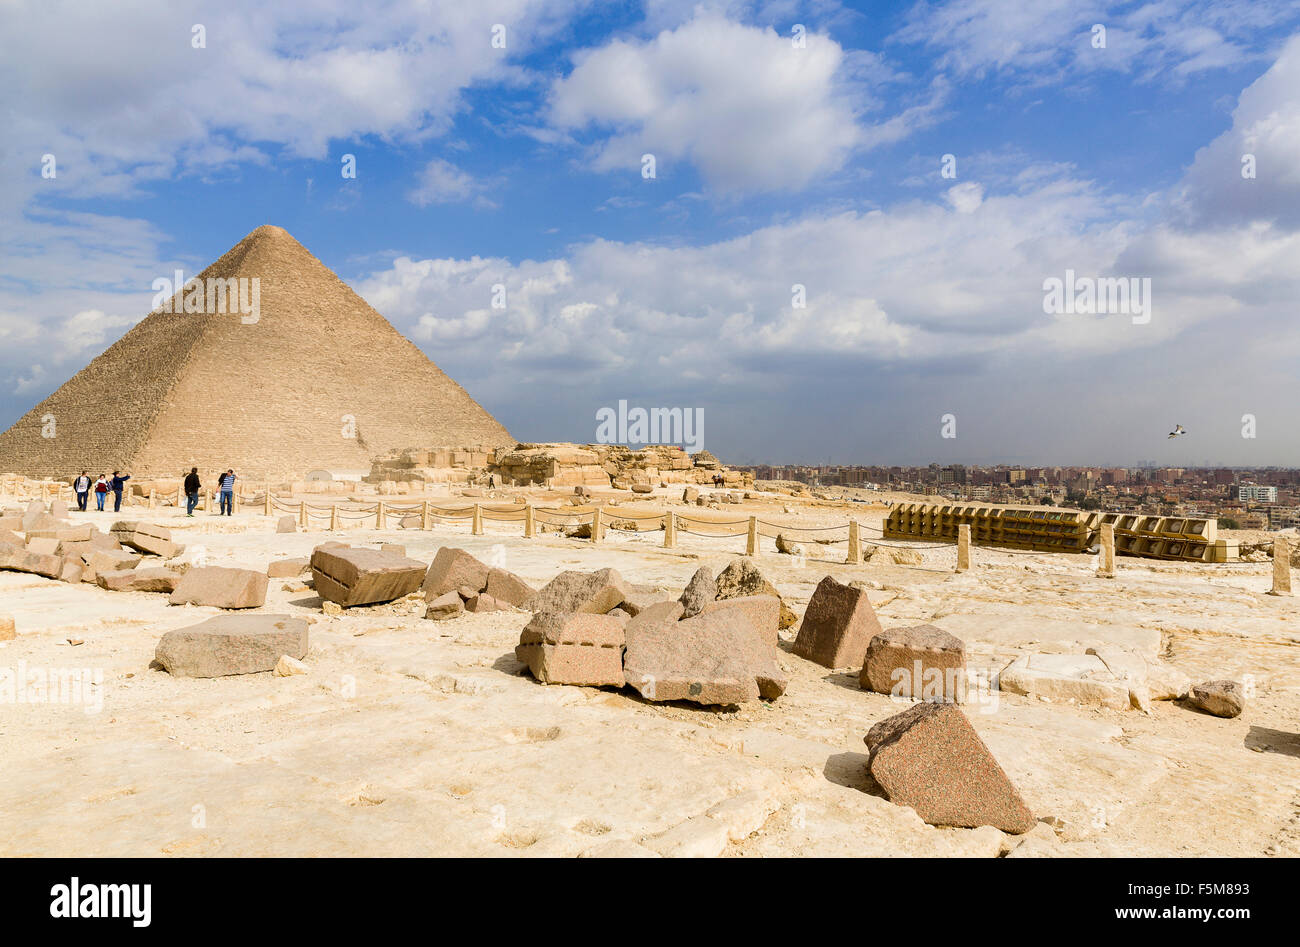 Egypt, Cairo: Great Pyramid of Giza (also known as the Pyramid of Khufu or the Pyramid of Cheops) Stock Photo